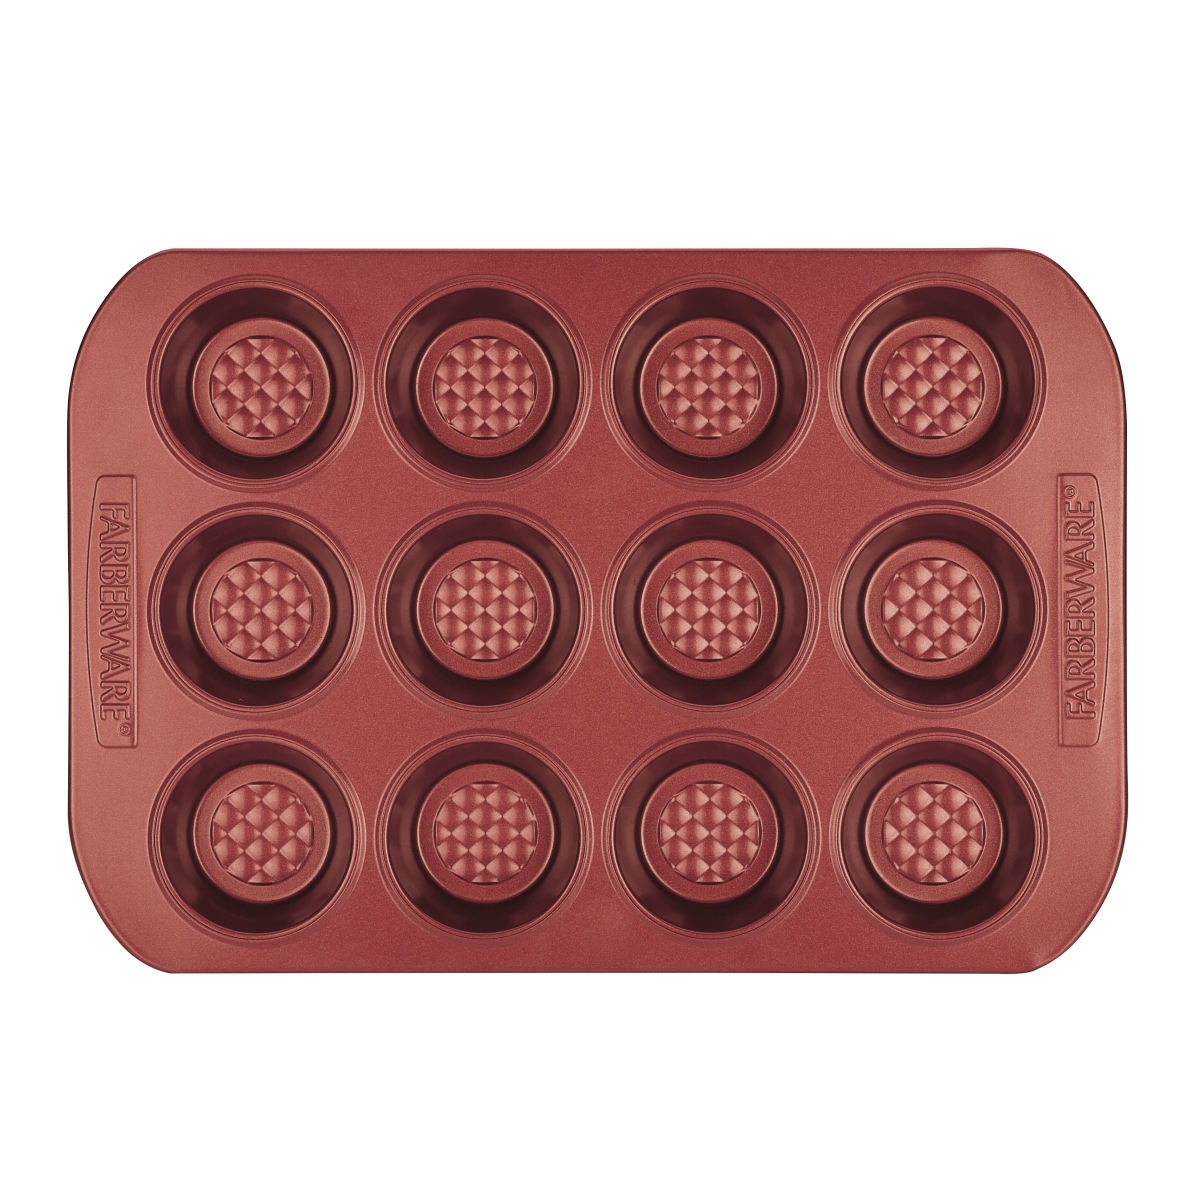 47140 Colorvive Nonstick 12 Cup Muffin Pan, Red